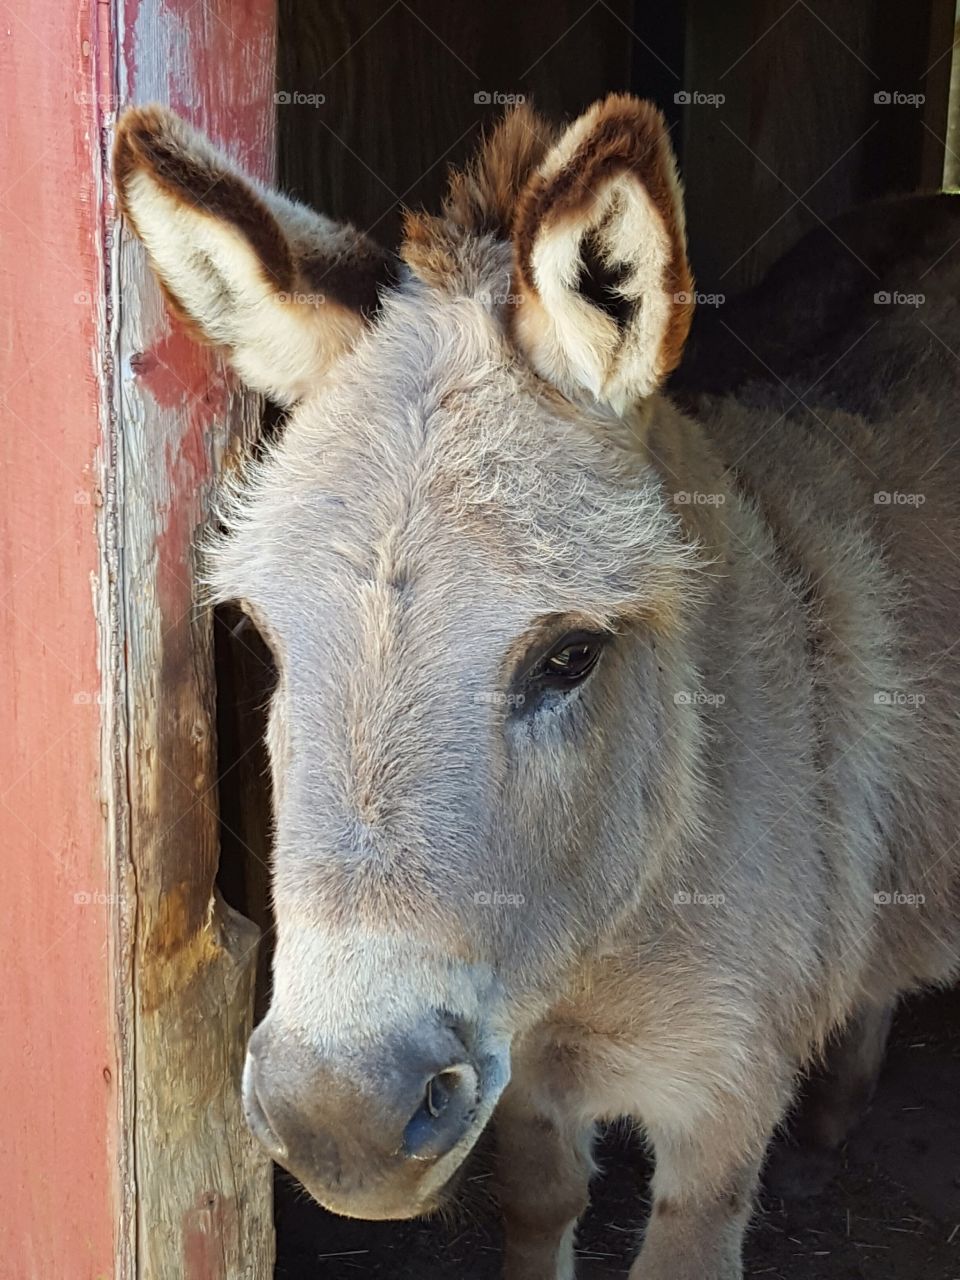 the grey donkey in the barn